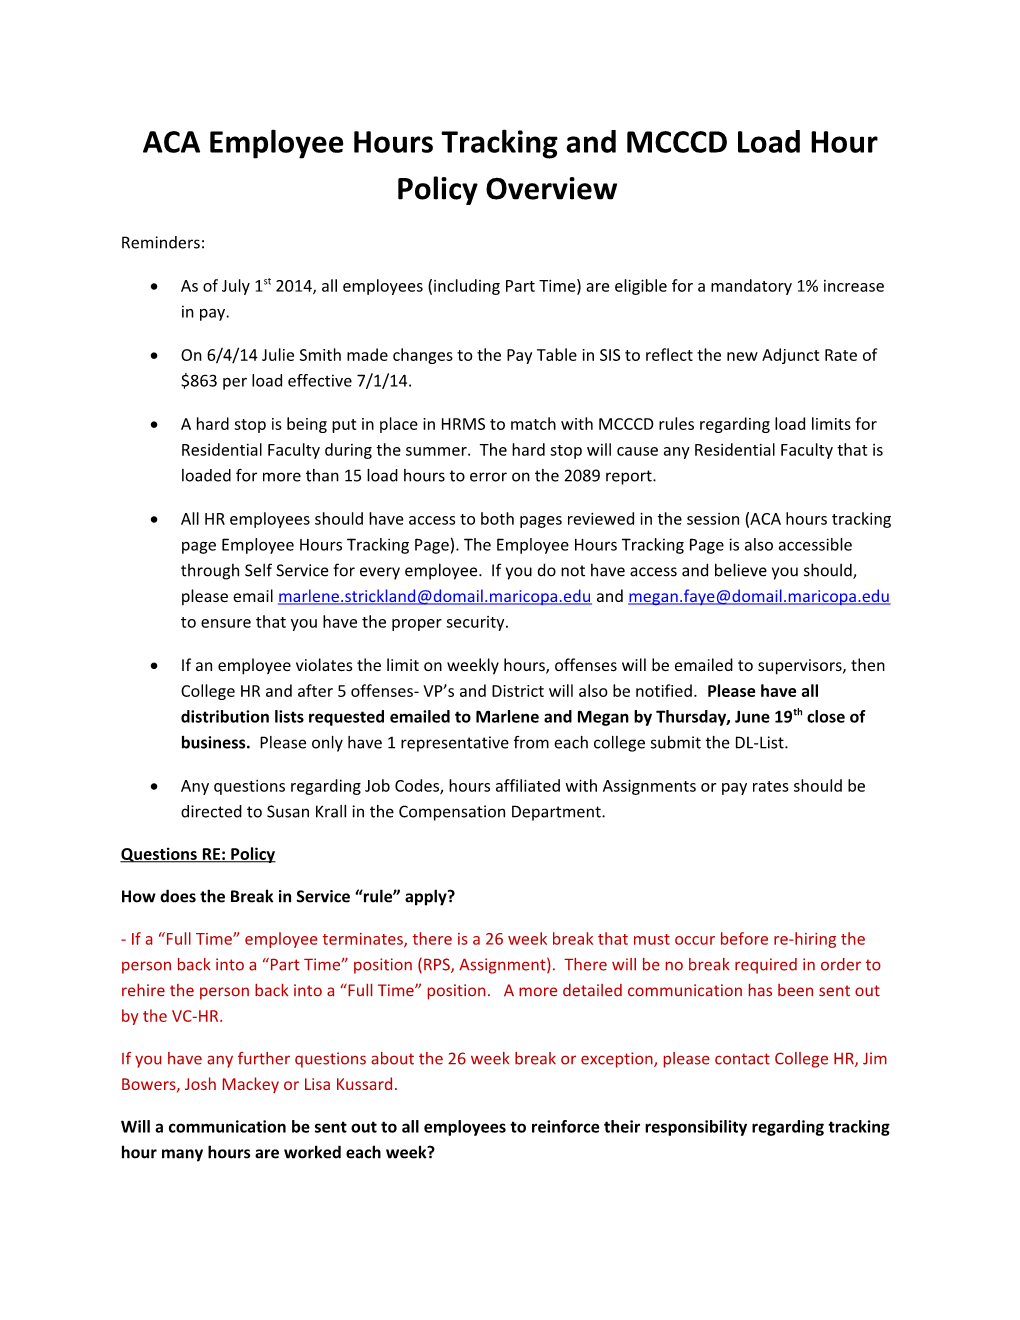 ACA Employee Hours Tracking and MCCCD Load Hour Policy Overview